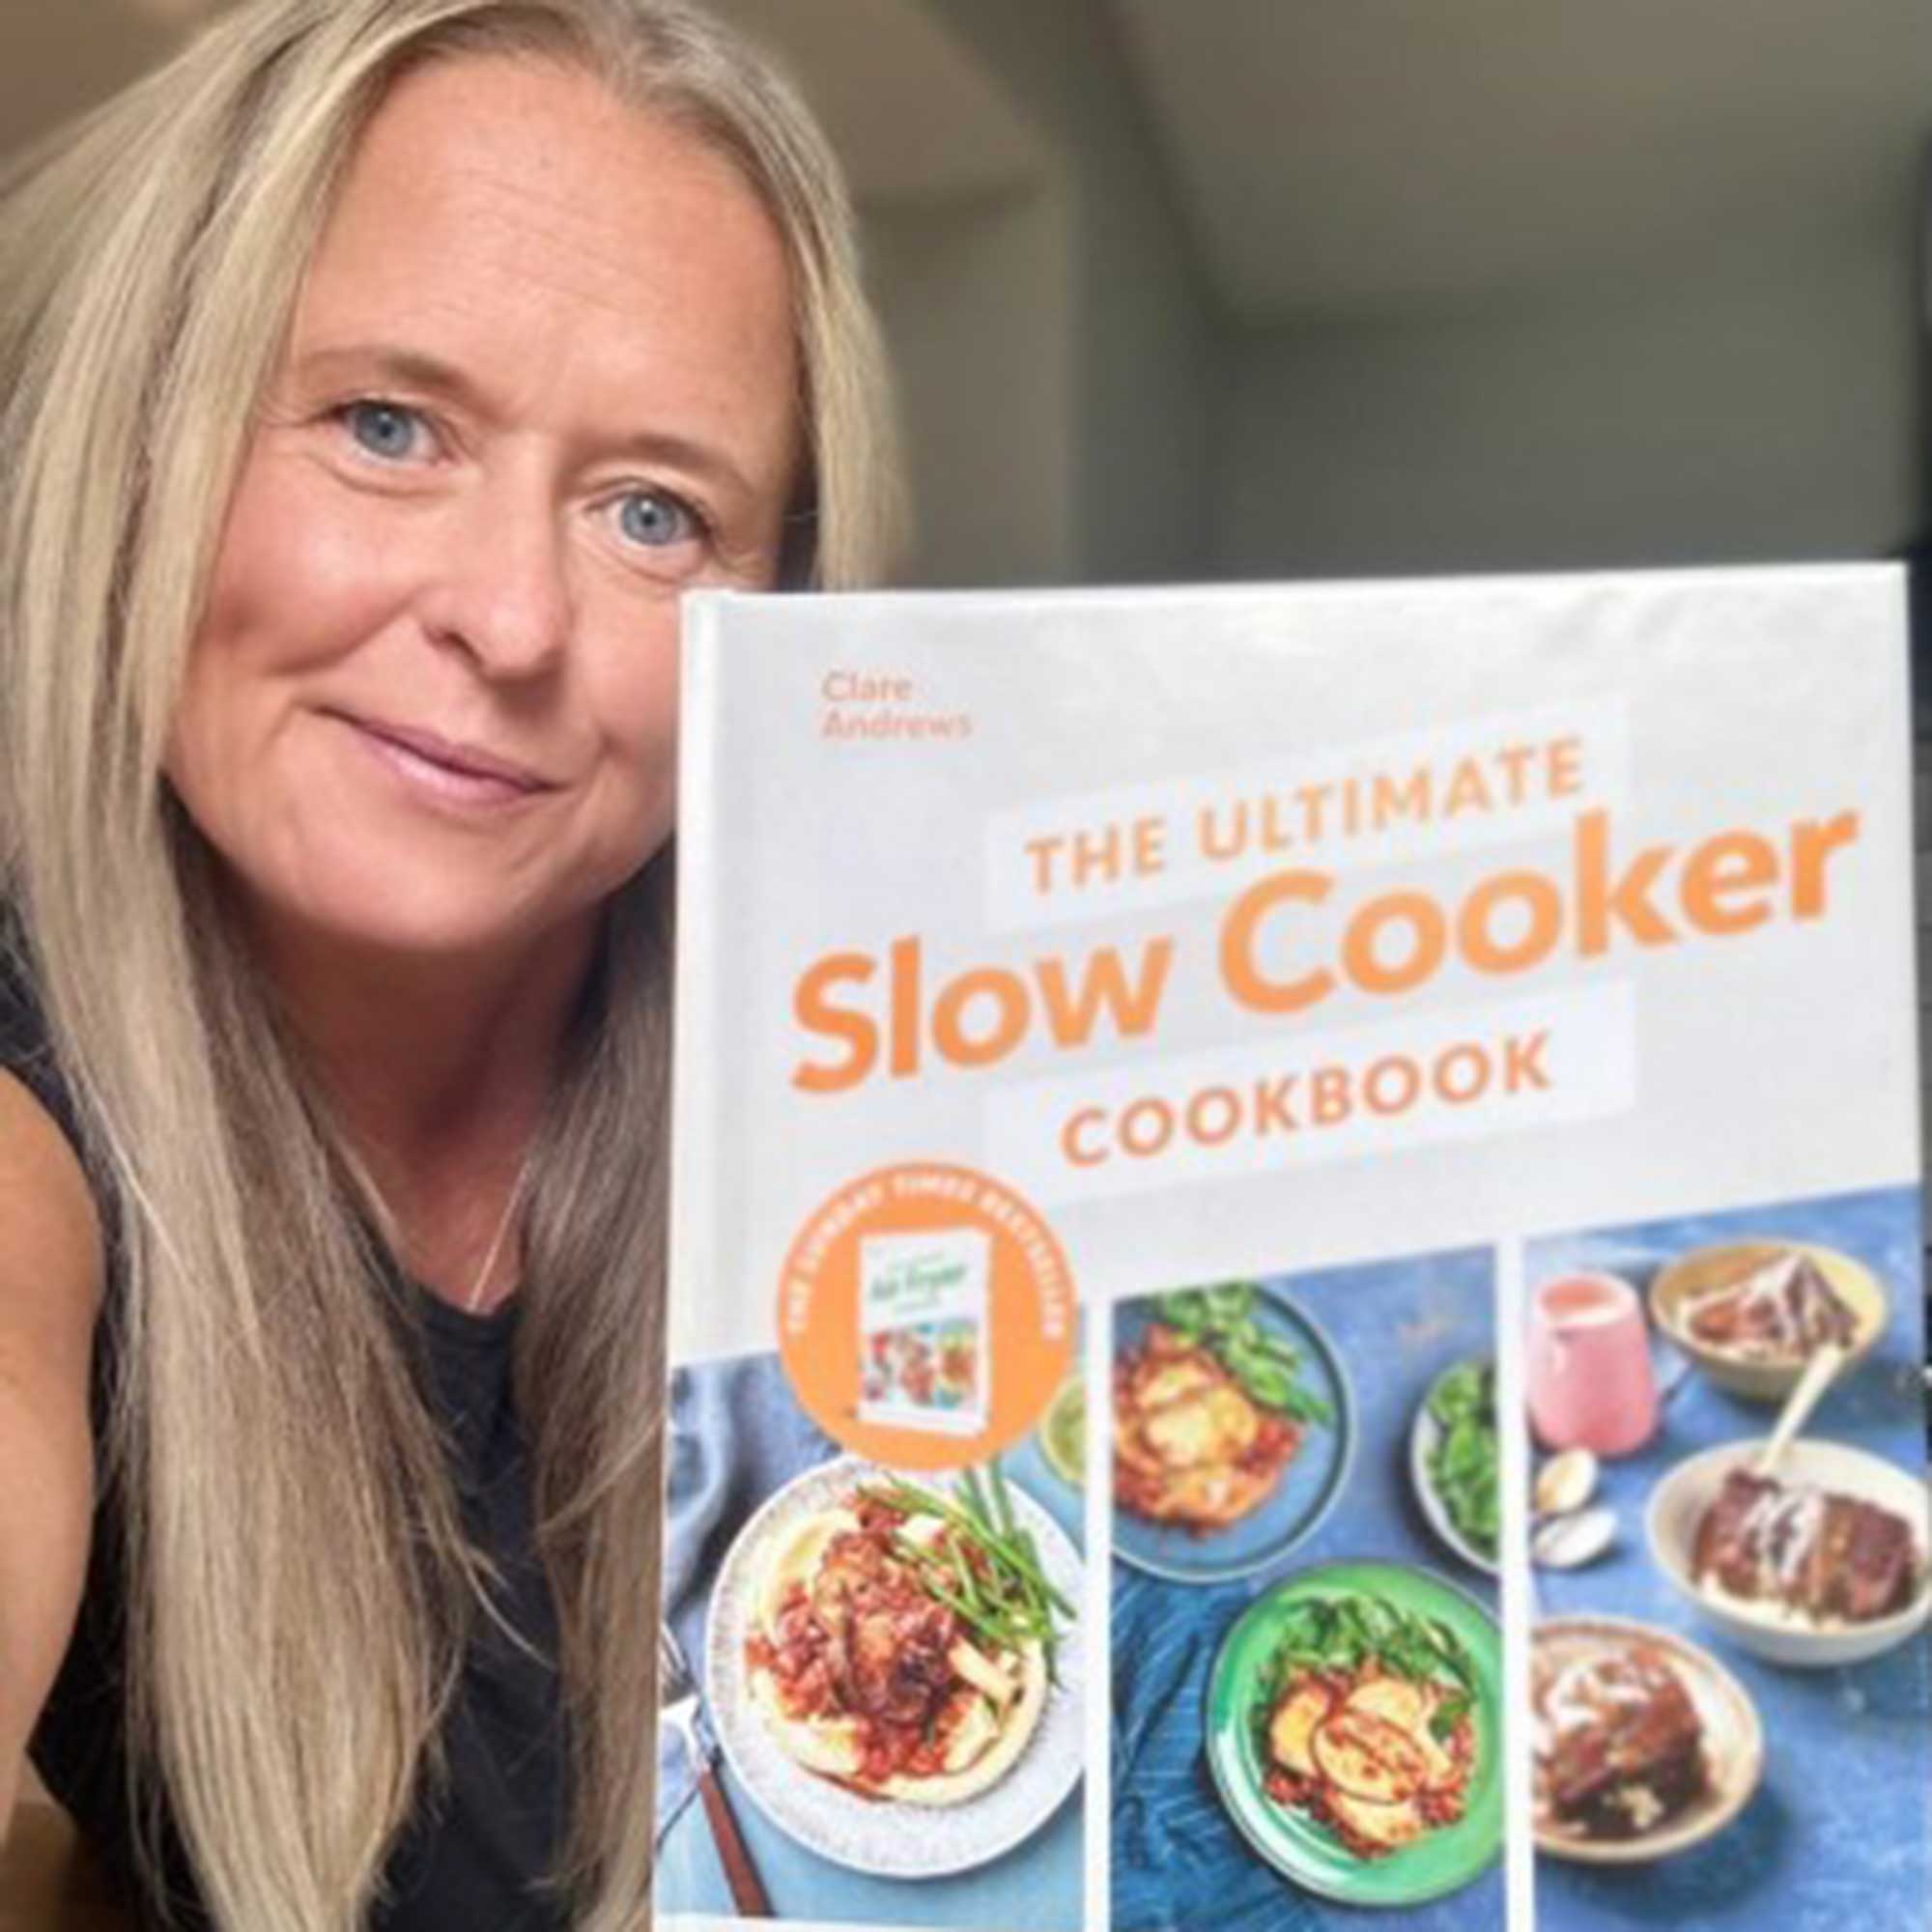 Author Clare Andrews with her slow cooker recipe book